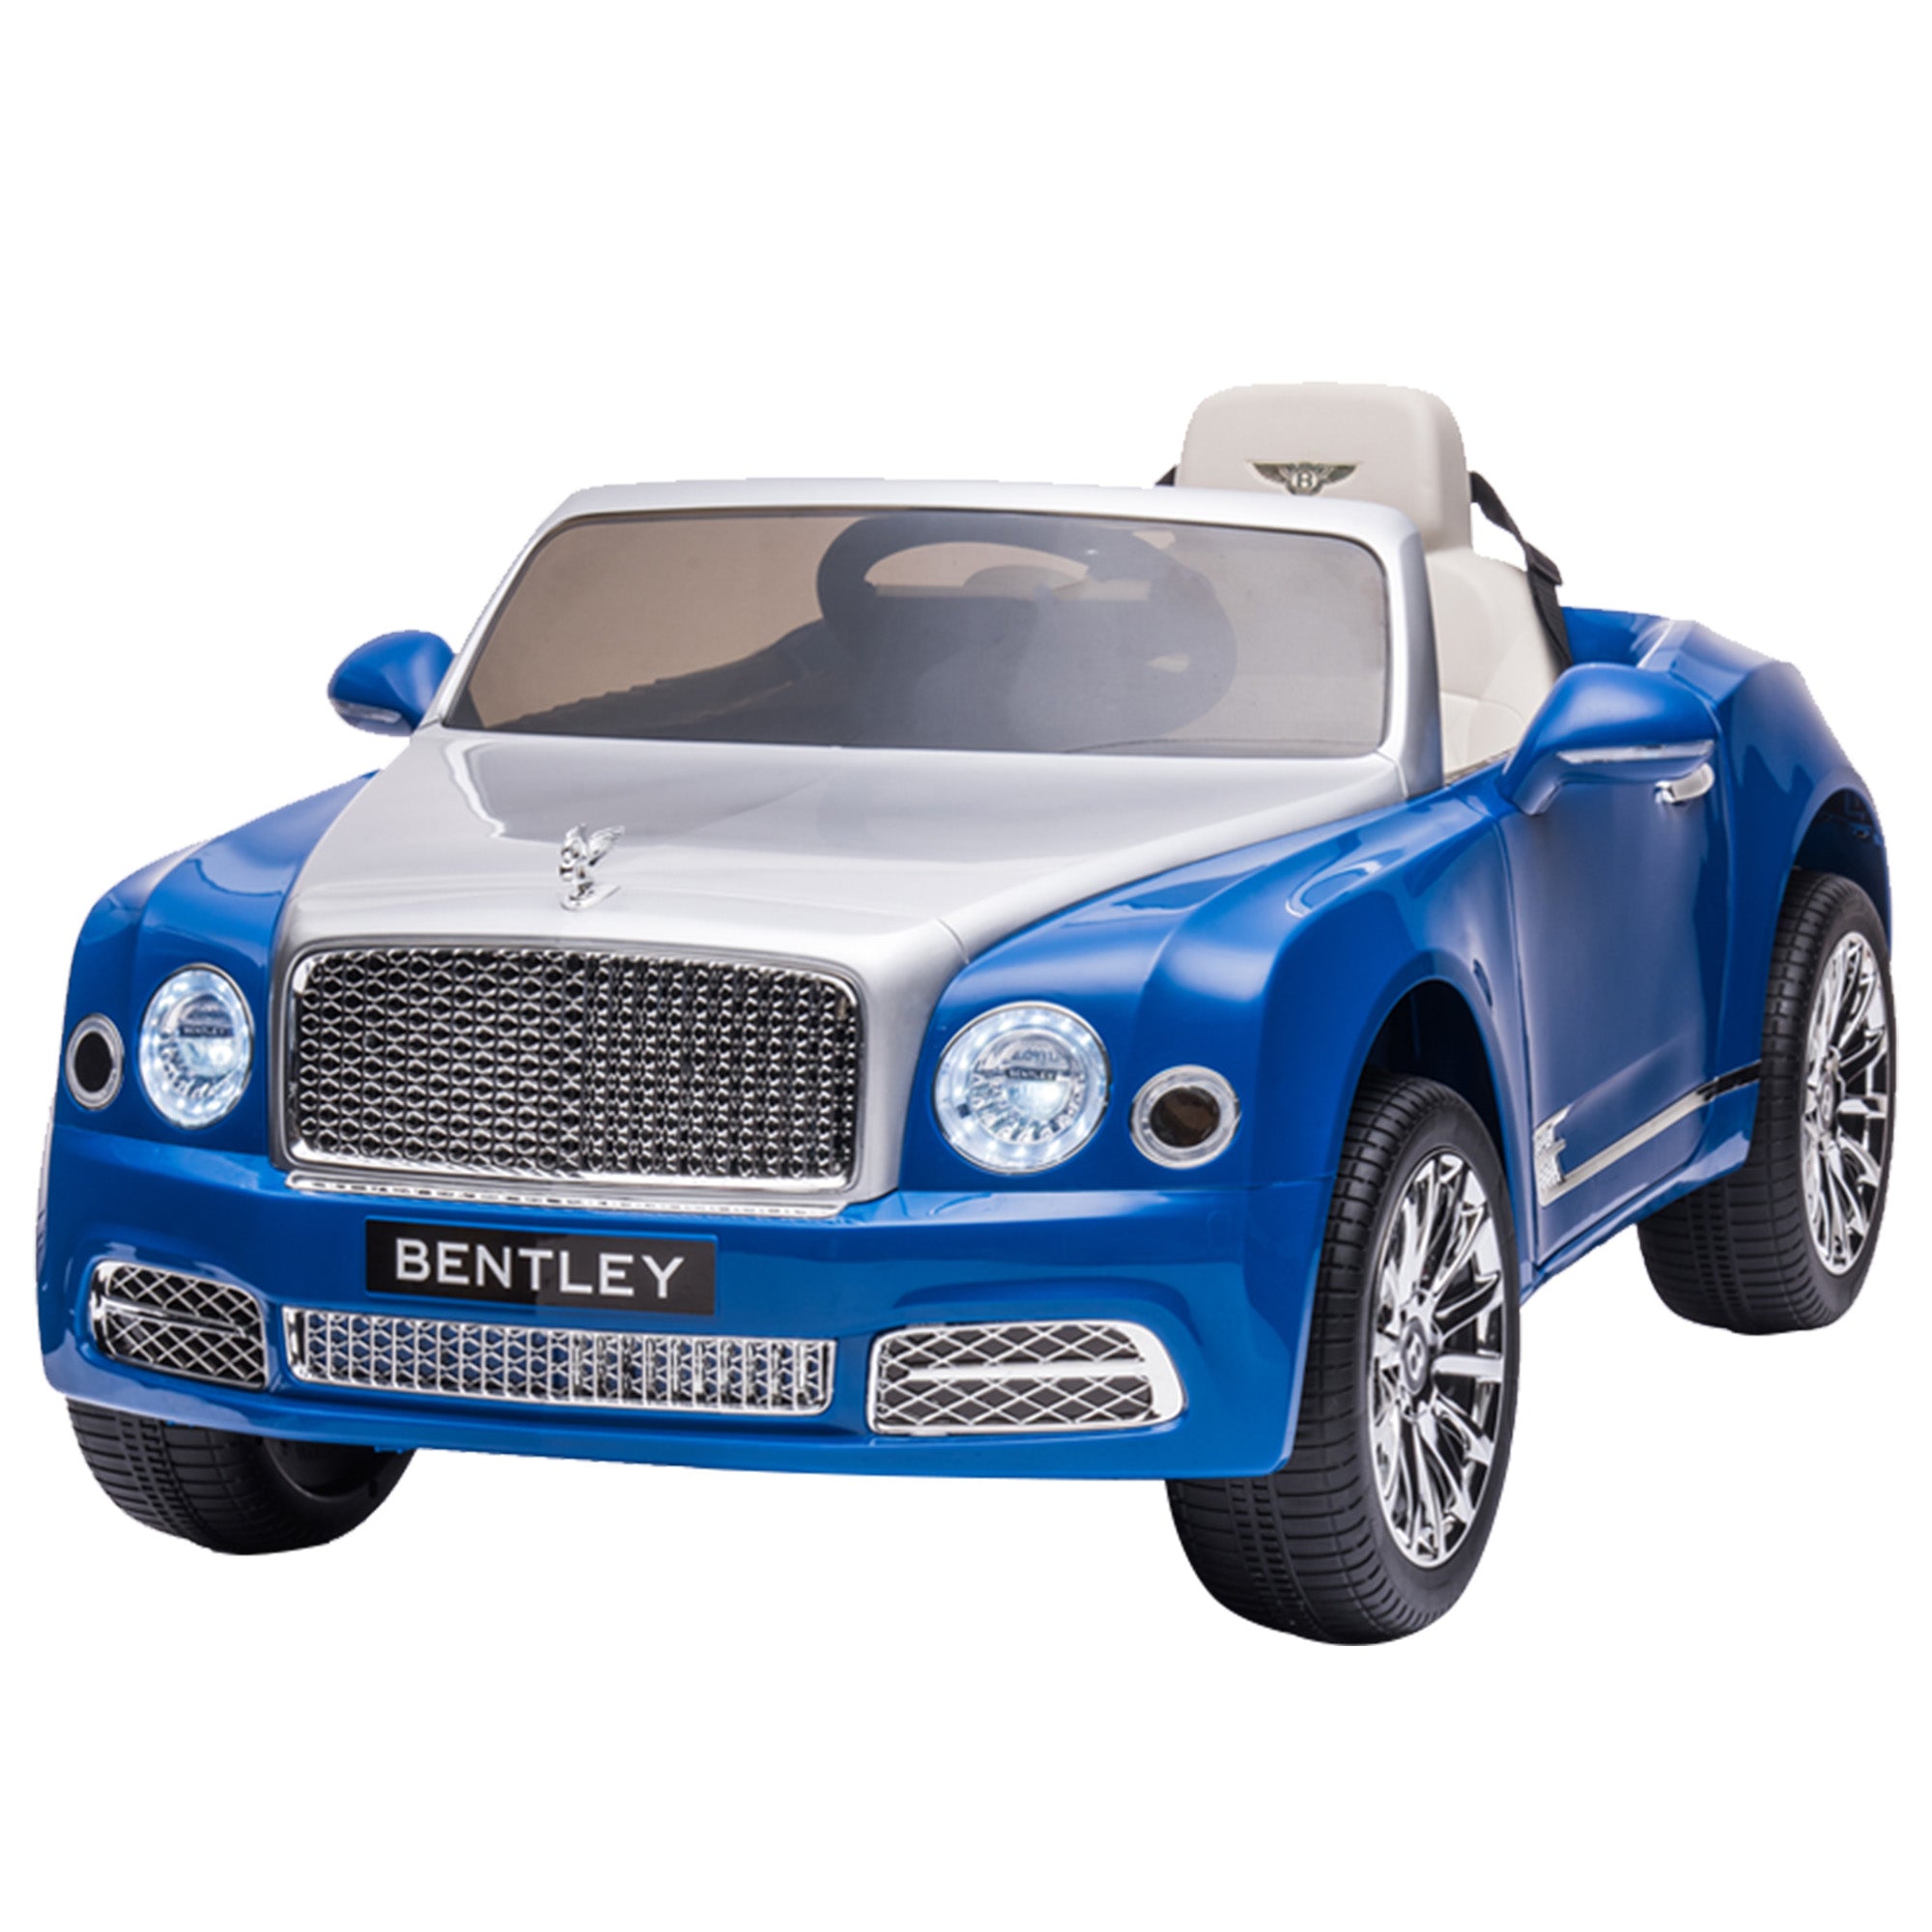 Kidsera Kids Ride On Car, Licensed Bentley Mulsanne Electric Car for Kids 12V Battery Powered Electric Vehicle with LED Light, Toddler Ride On 4-Wheel Toys for Boys and Girls